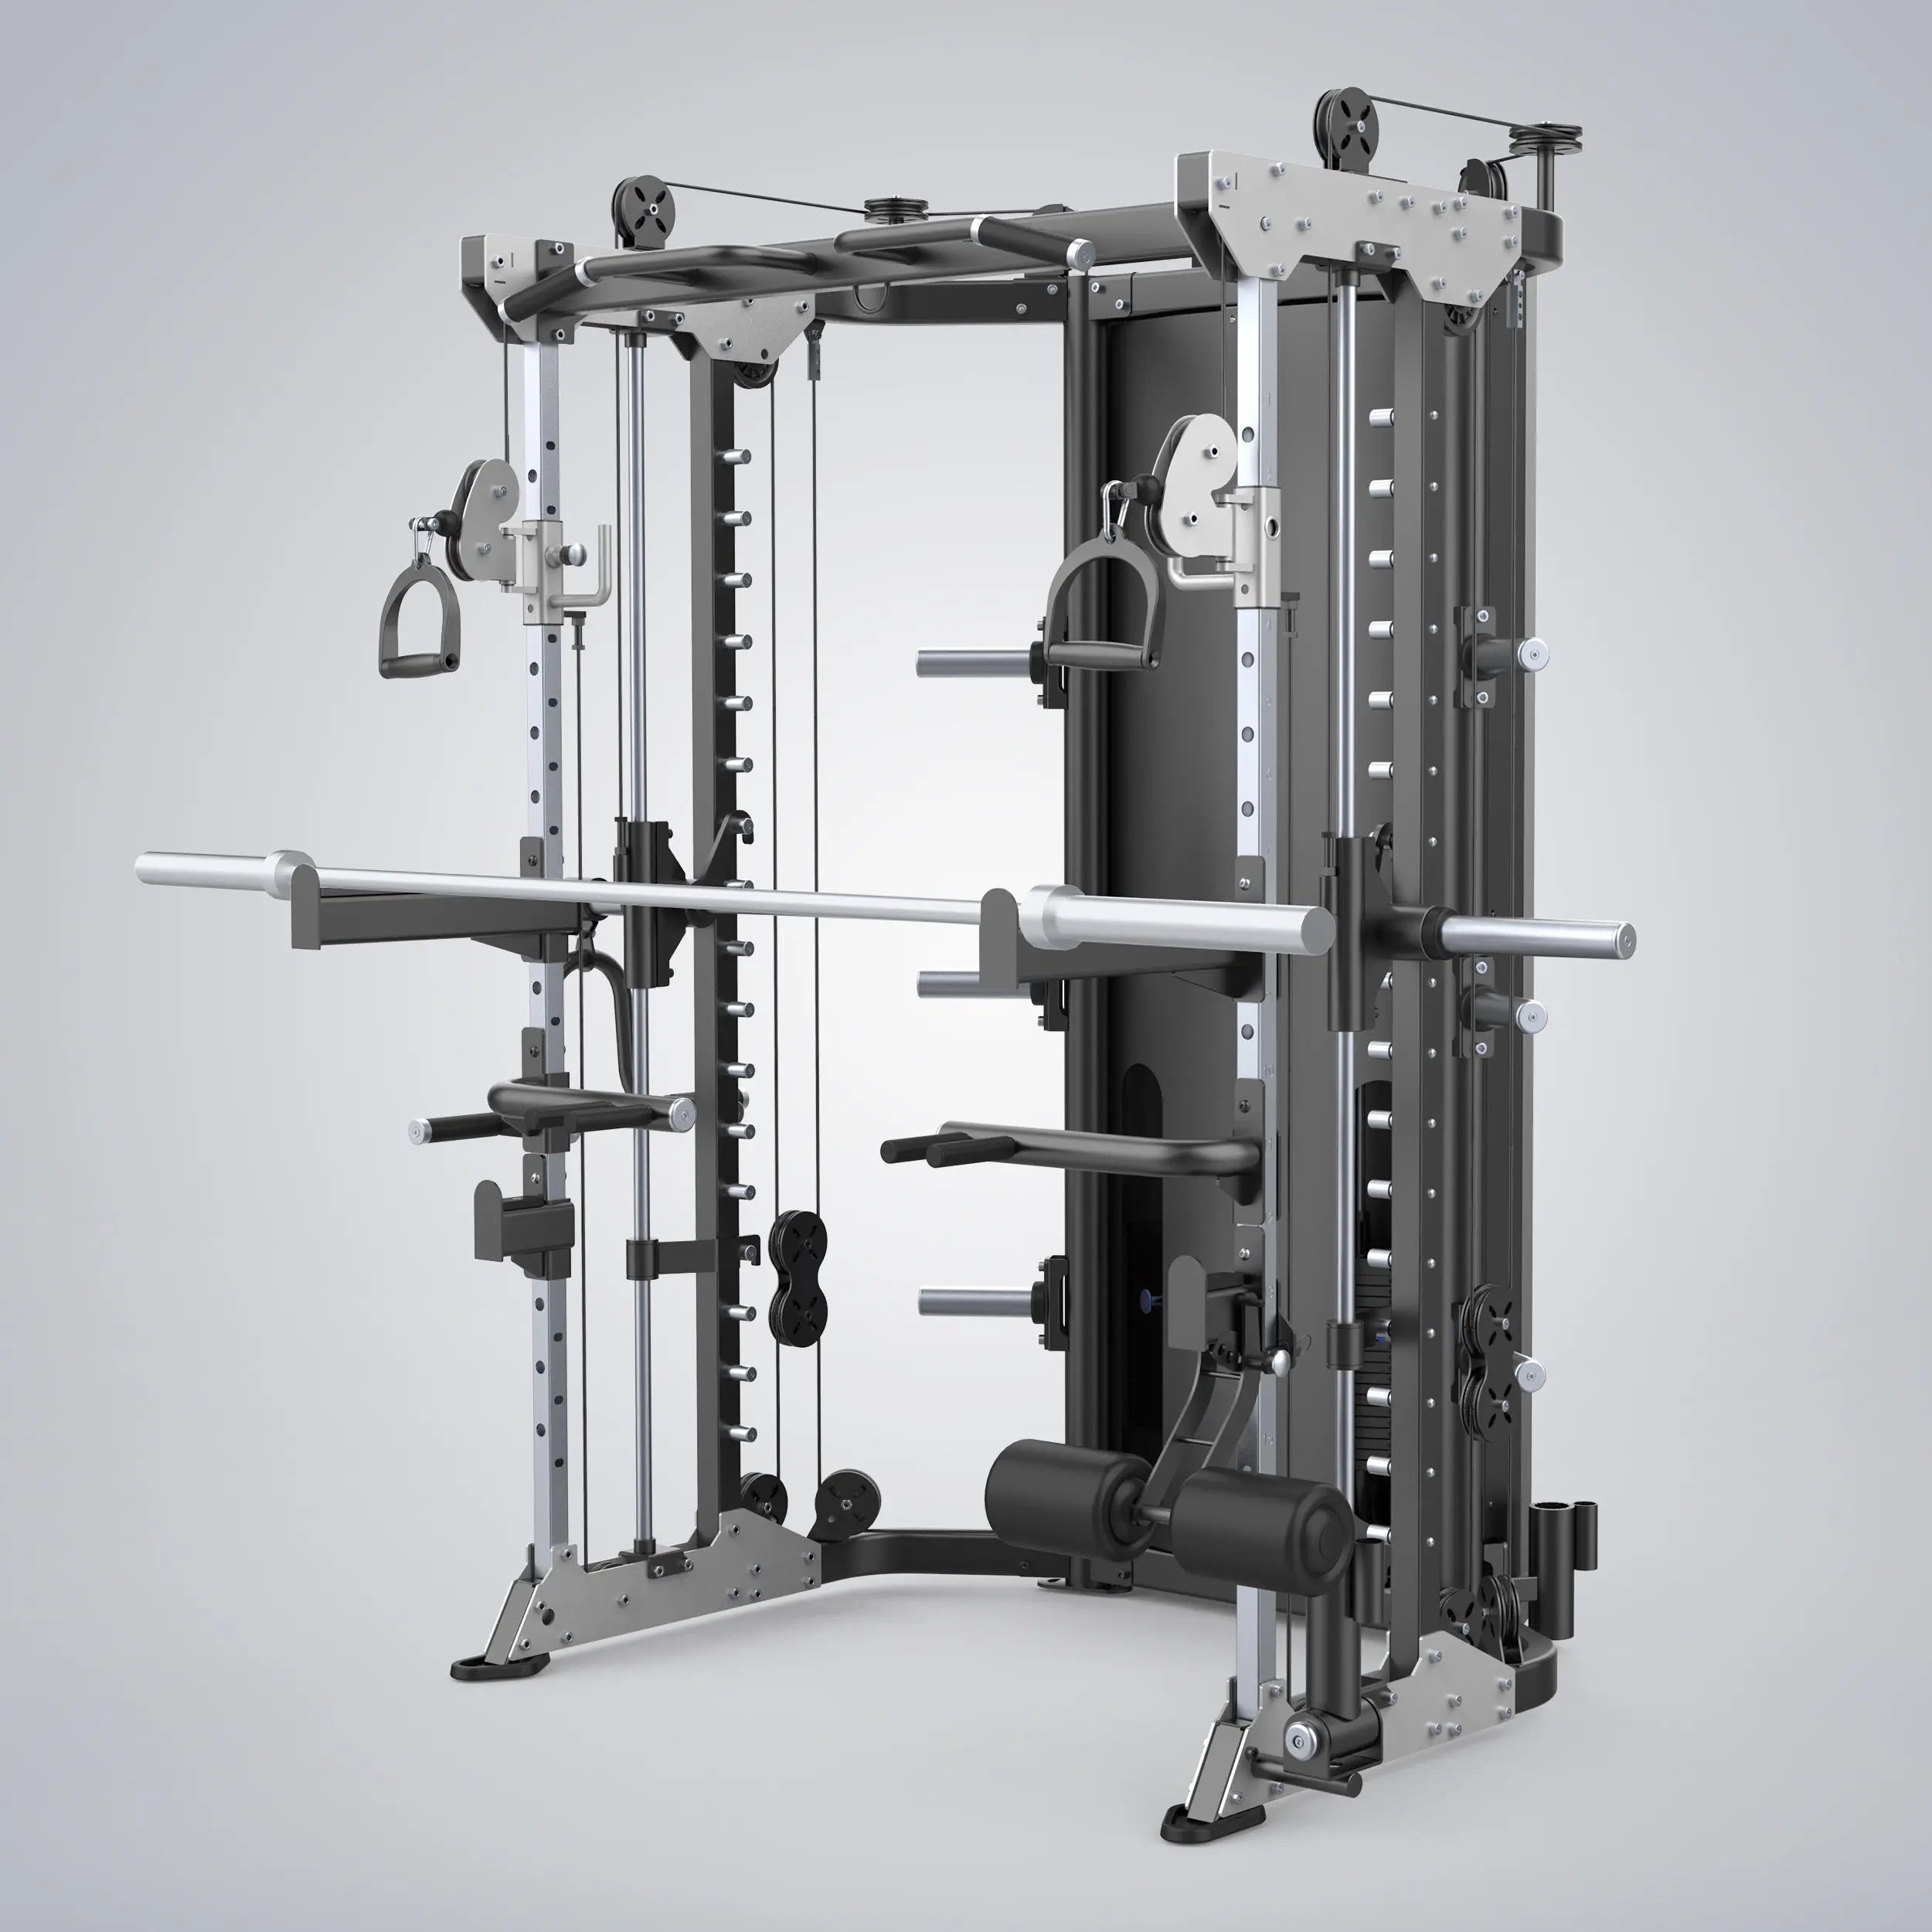 red Functional Smith Machine